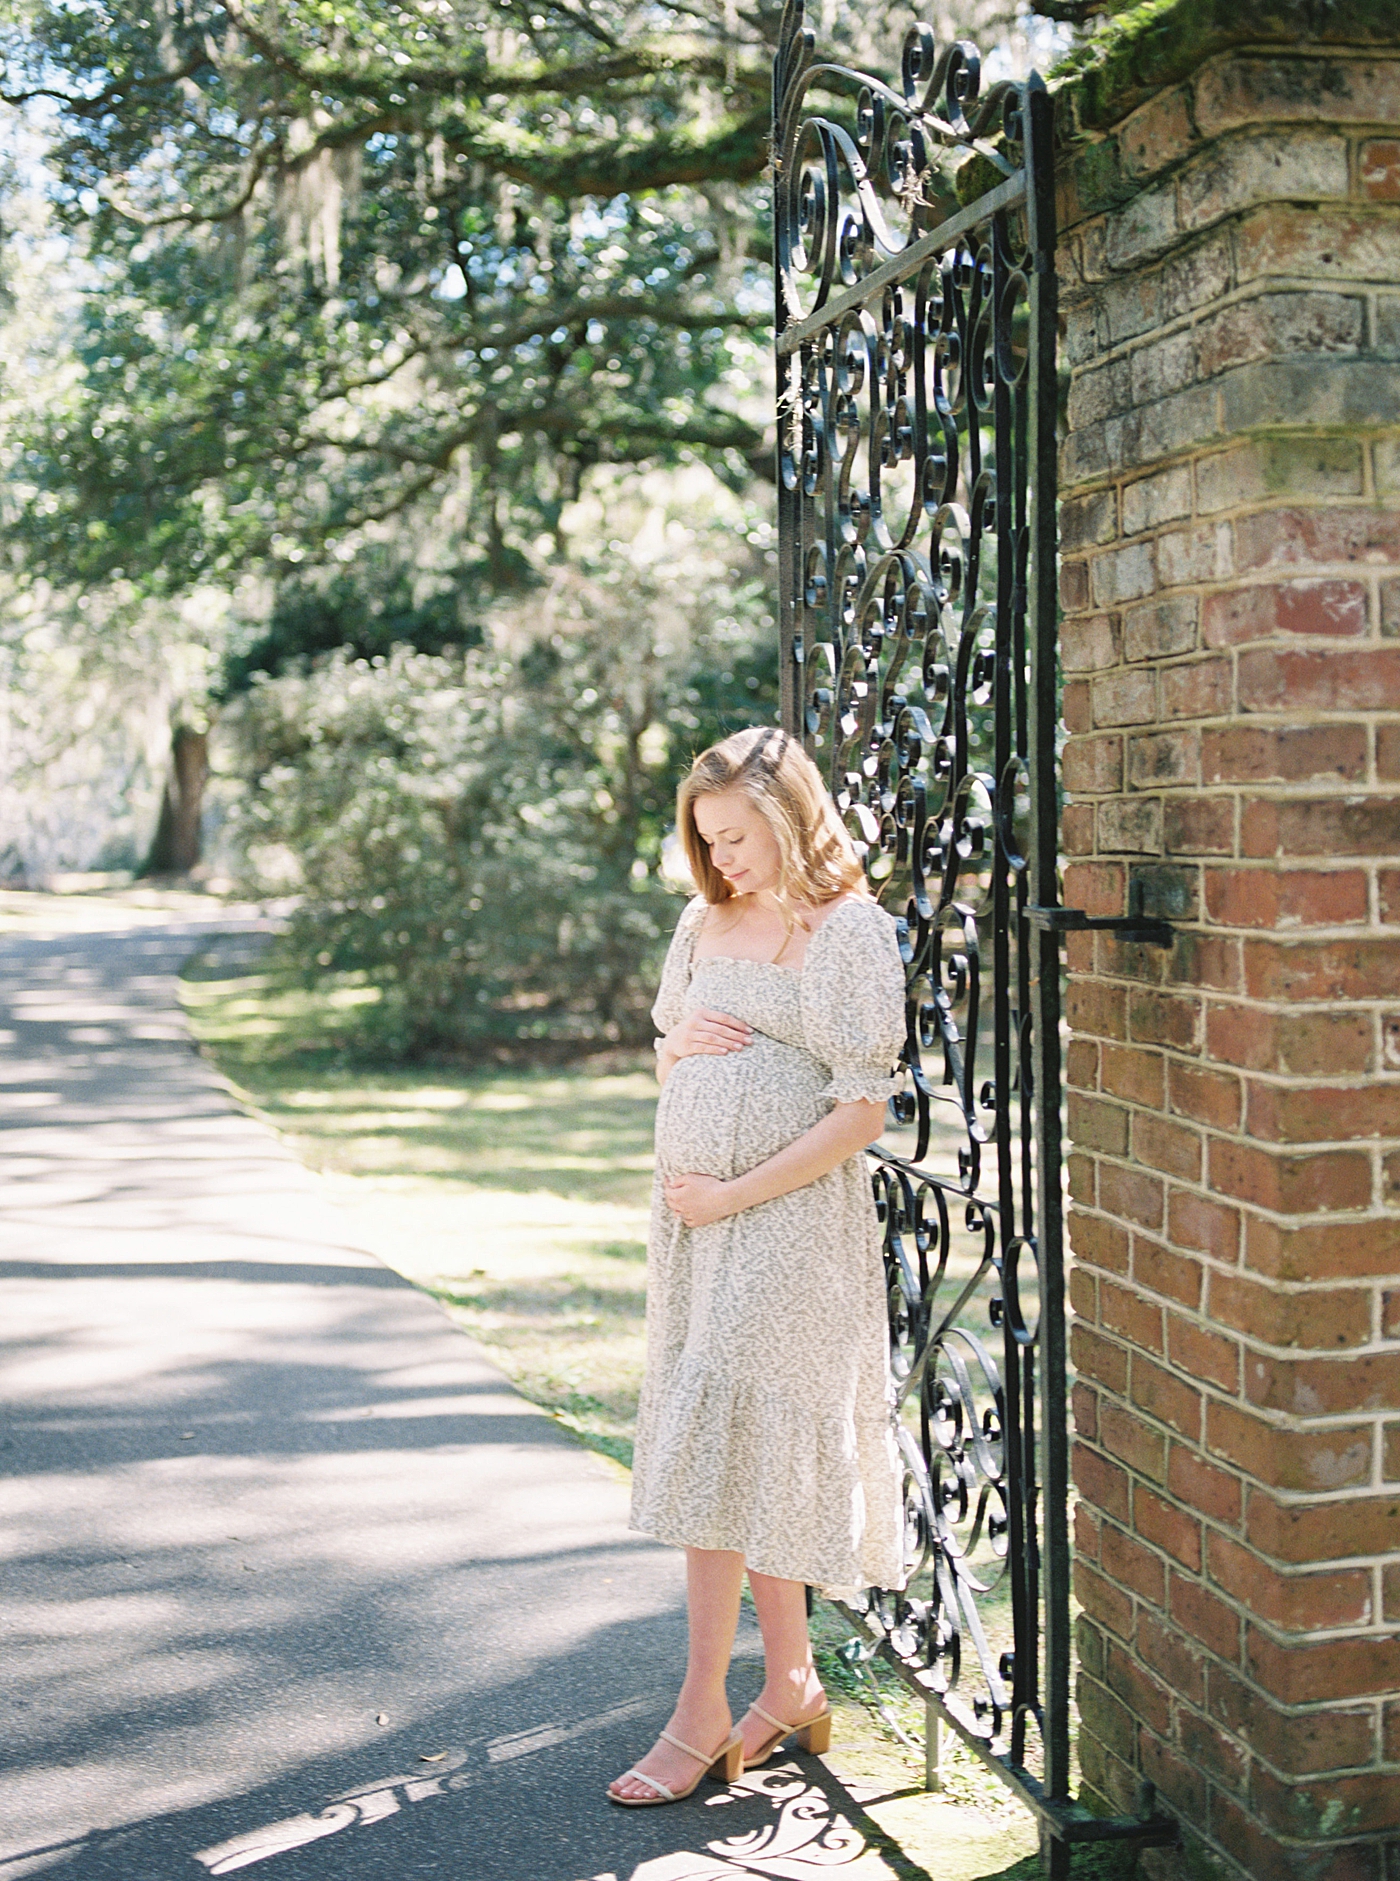 Woman in a spring dress holding her pregnant belly next to an iron gate | Image by Caitlyn Motycka Photography